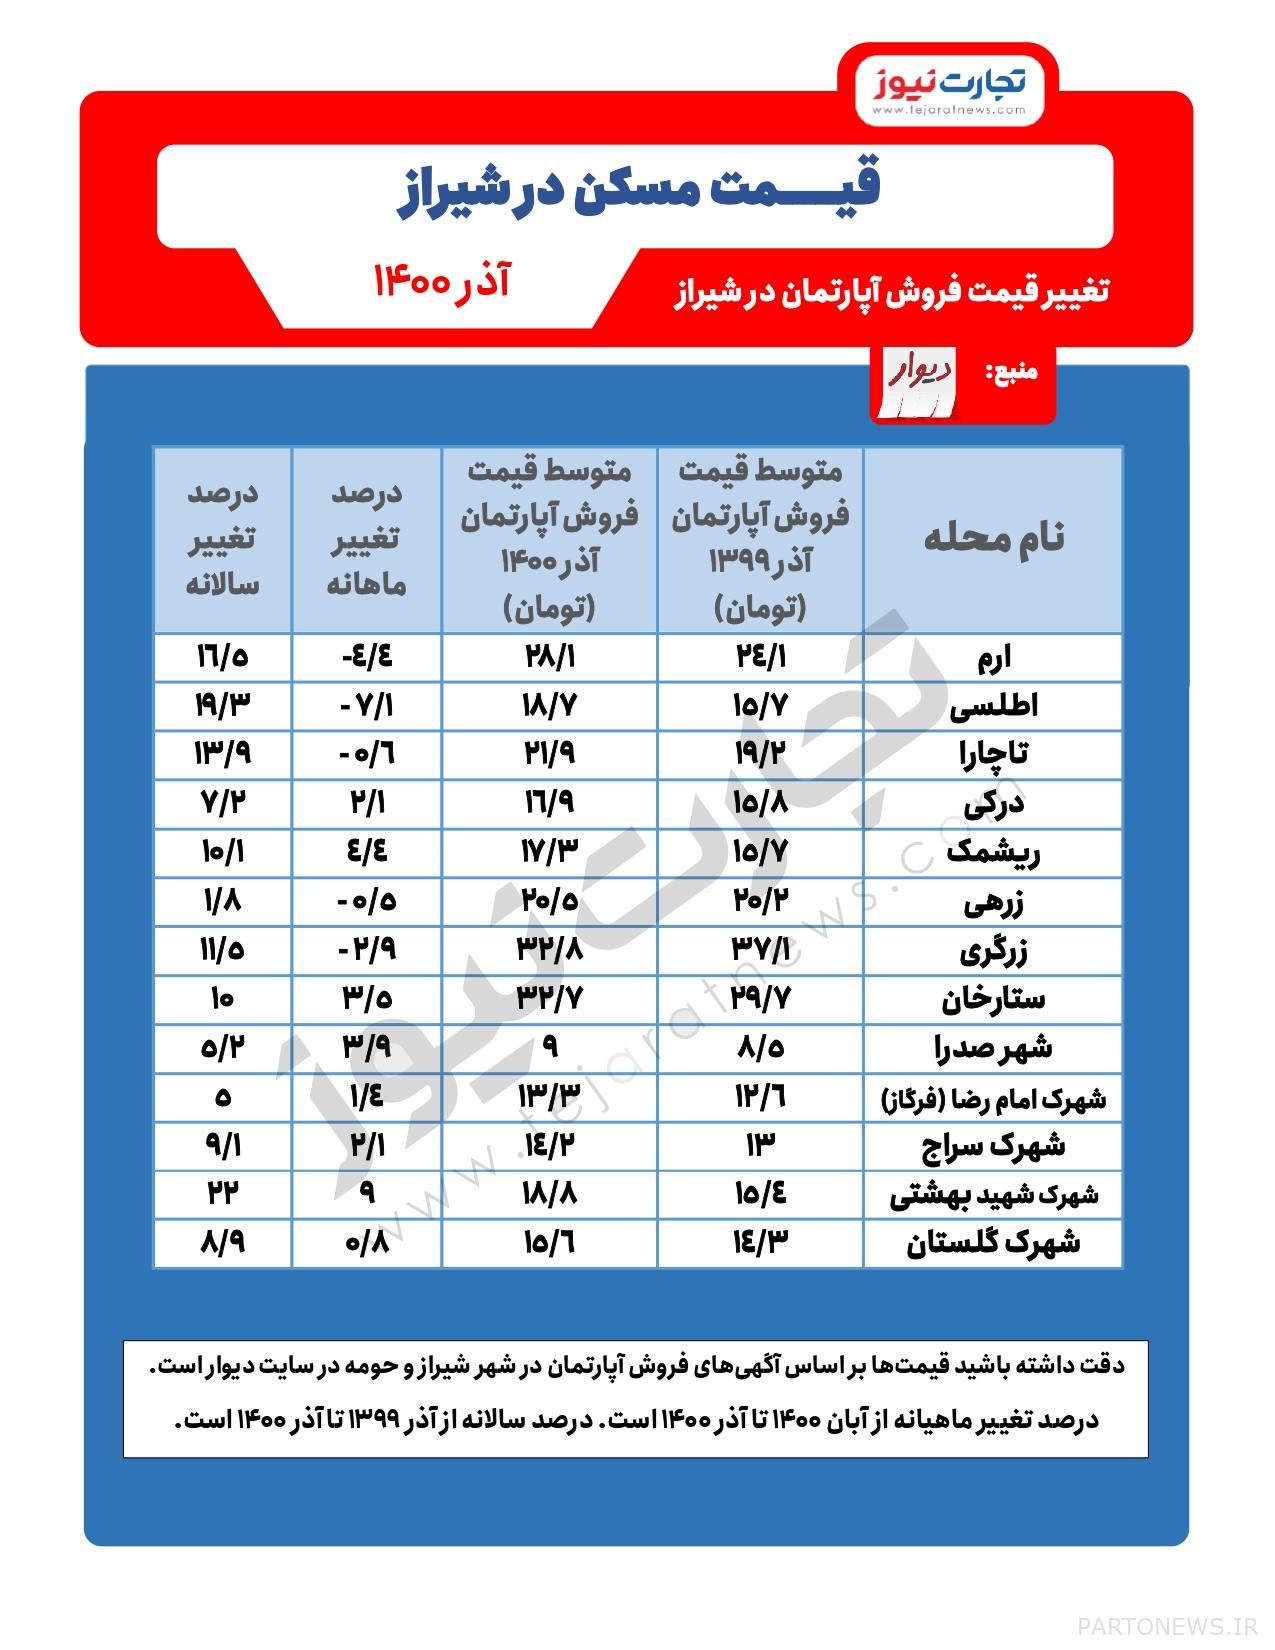 20% increase in apartment prices in Shiraz / Which neighborhoods became more expensive?